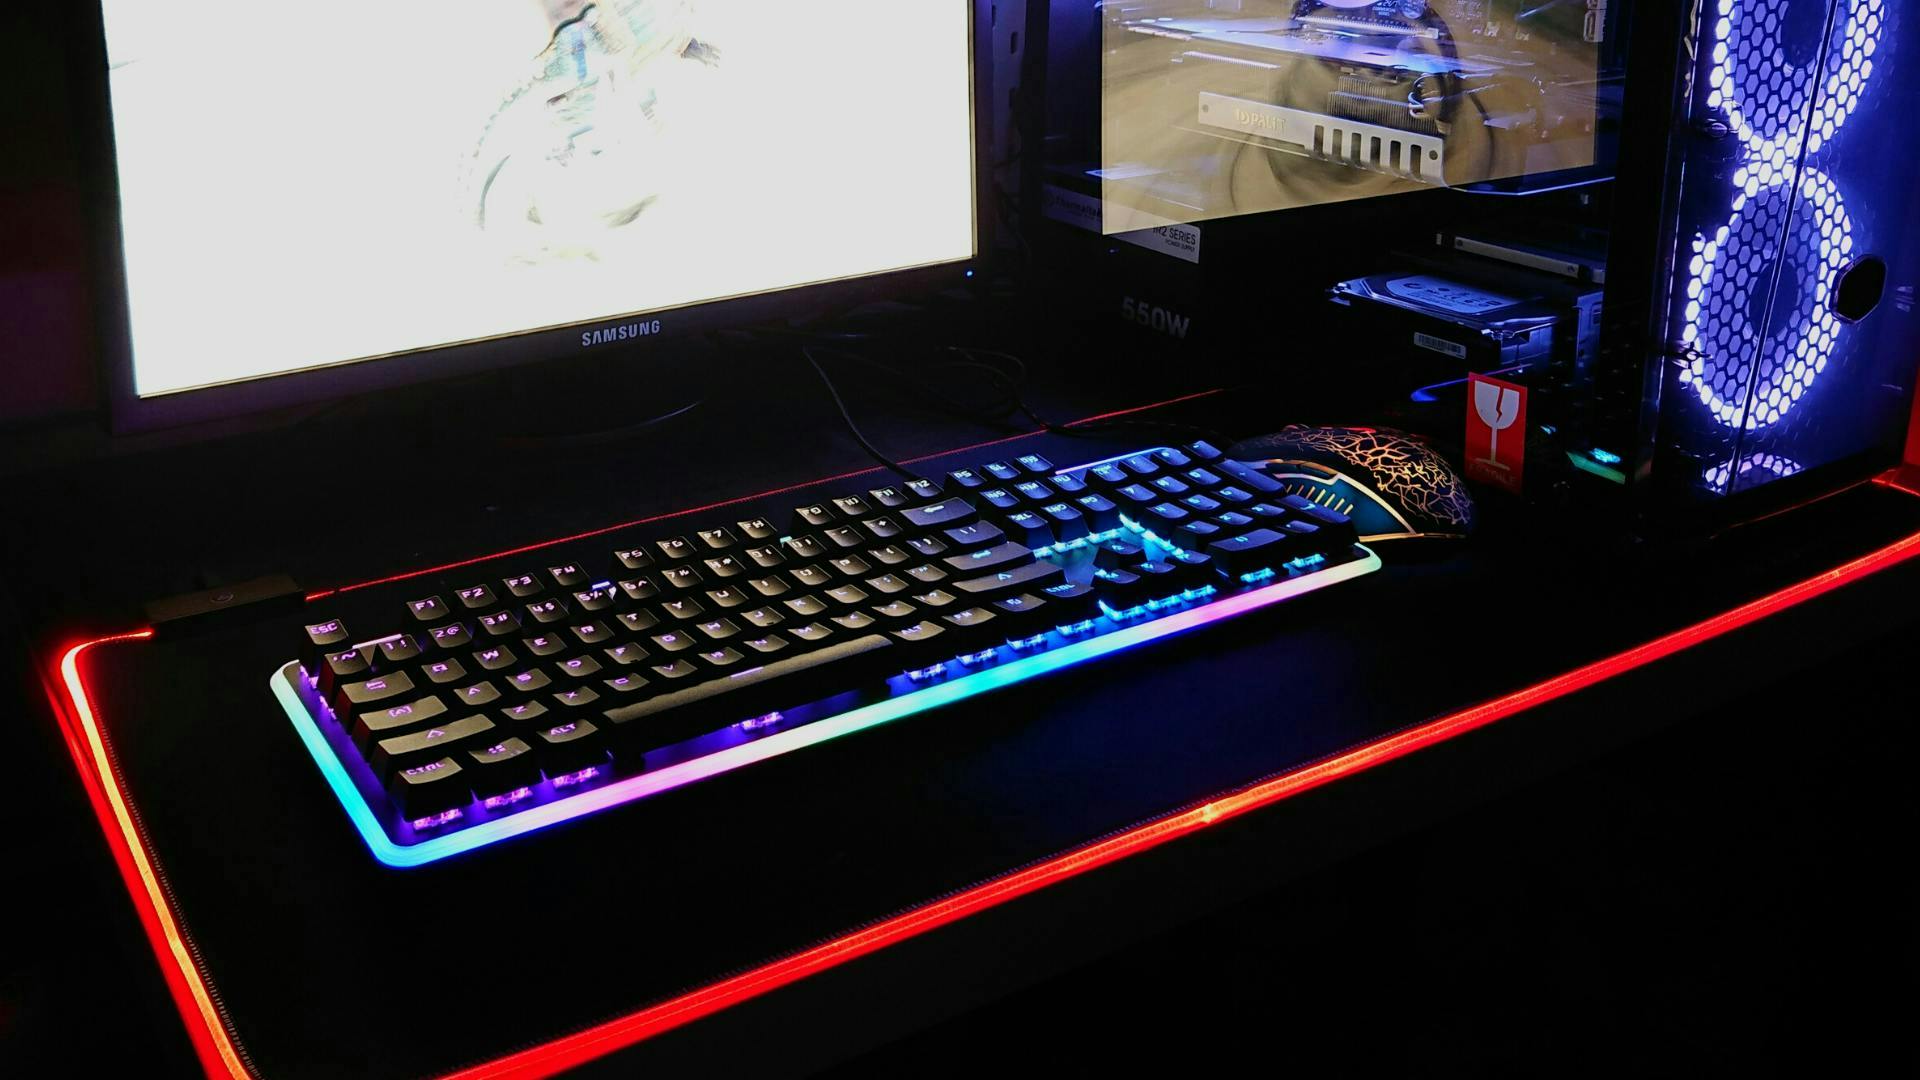 An LED illuminated gaming keyboard stands on a gaming table next to a gaming PC with LED components.